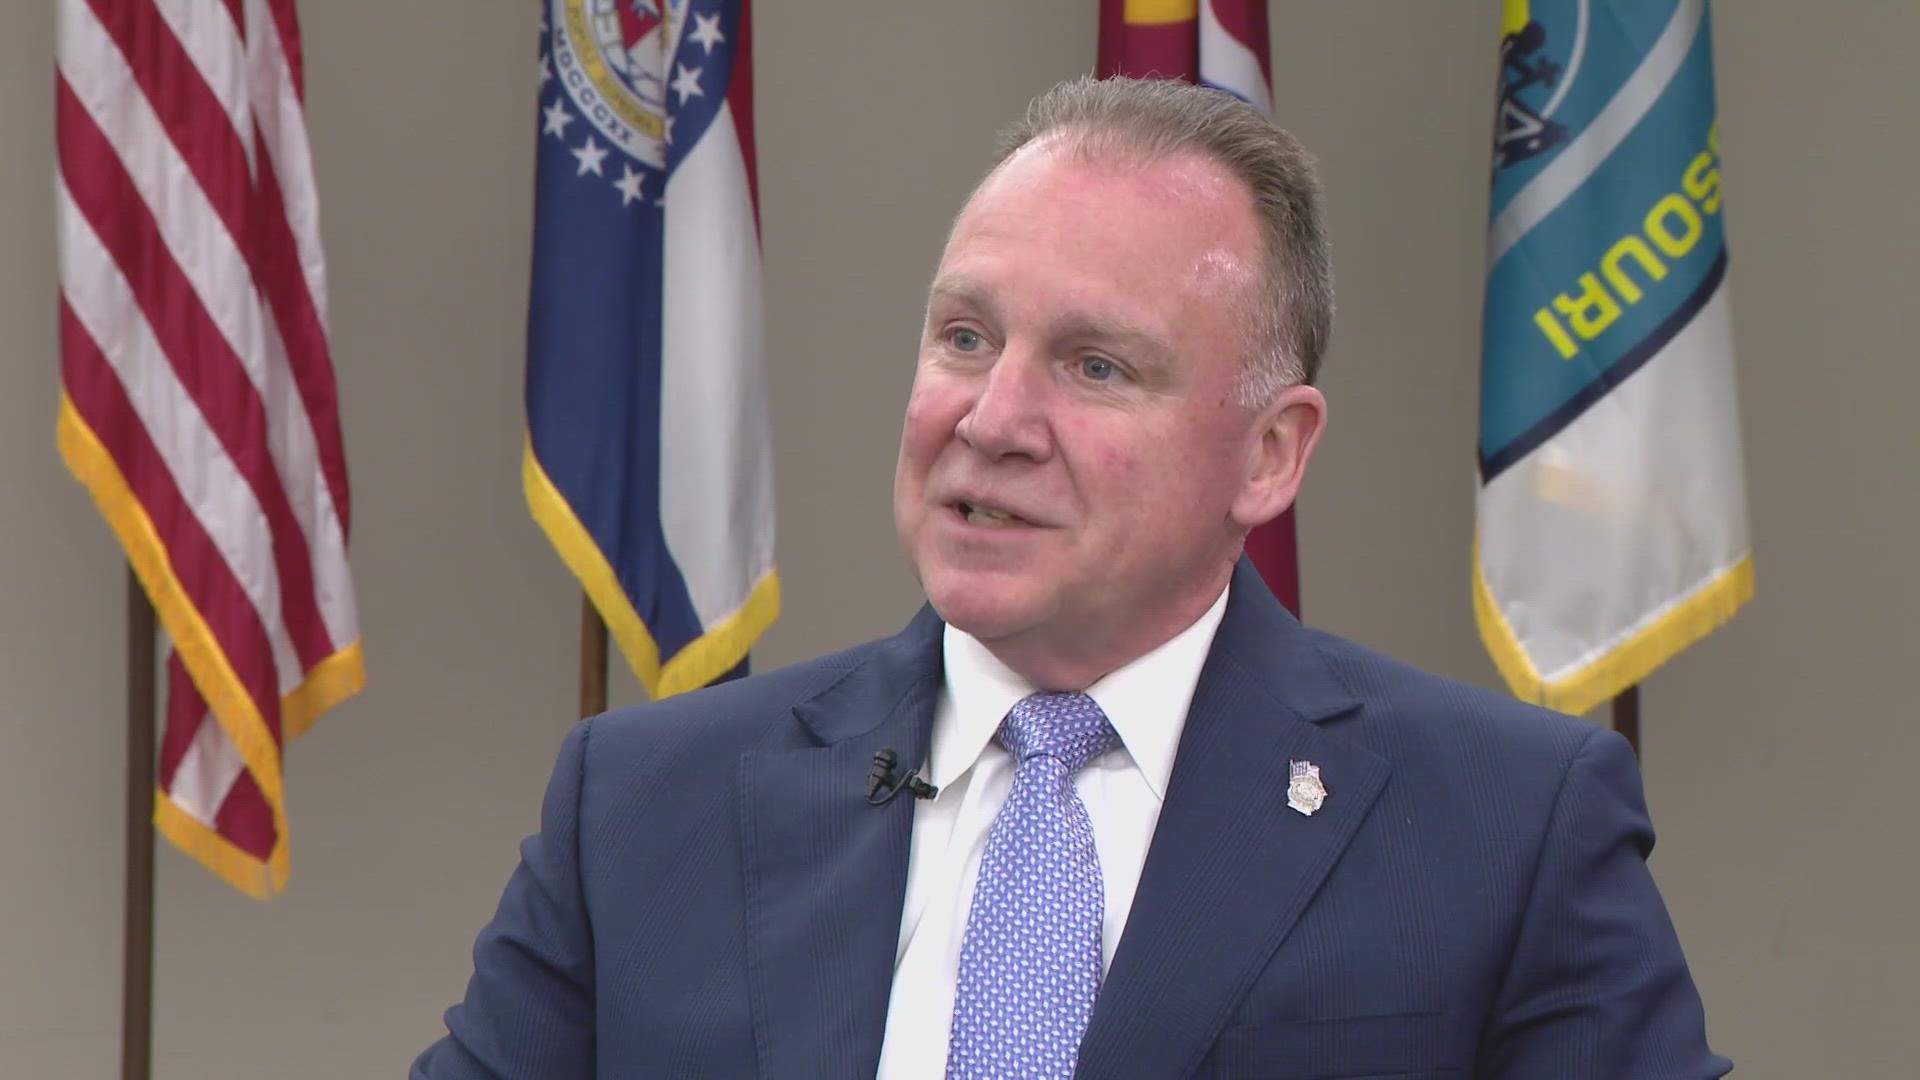 The I-Team’s Christine Byers sat down with St. Louis Police Chief Robert Tracy Thursday for his first one-on-one interview since he became the city’s police chief.